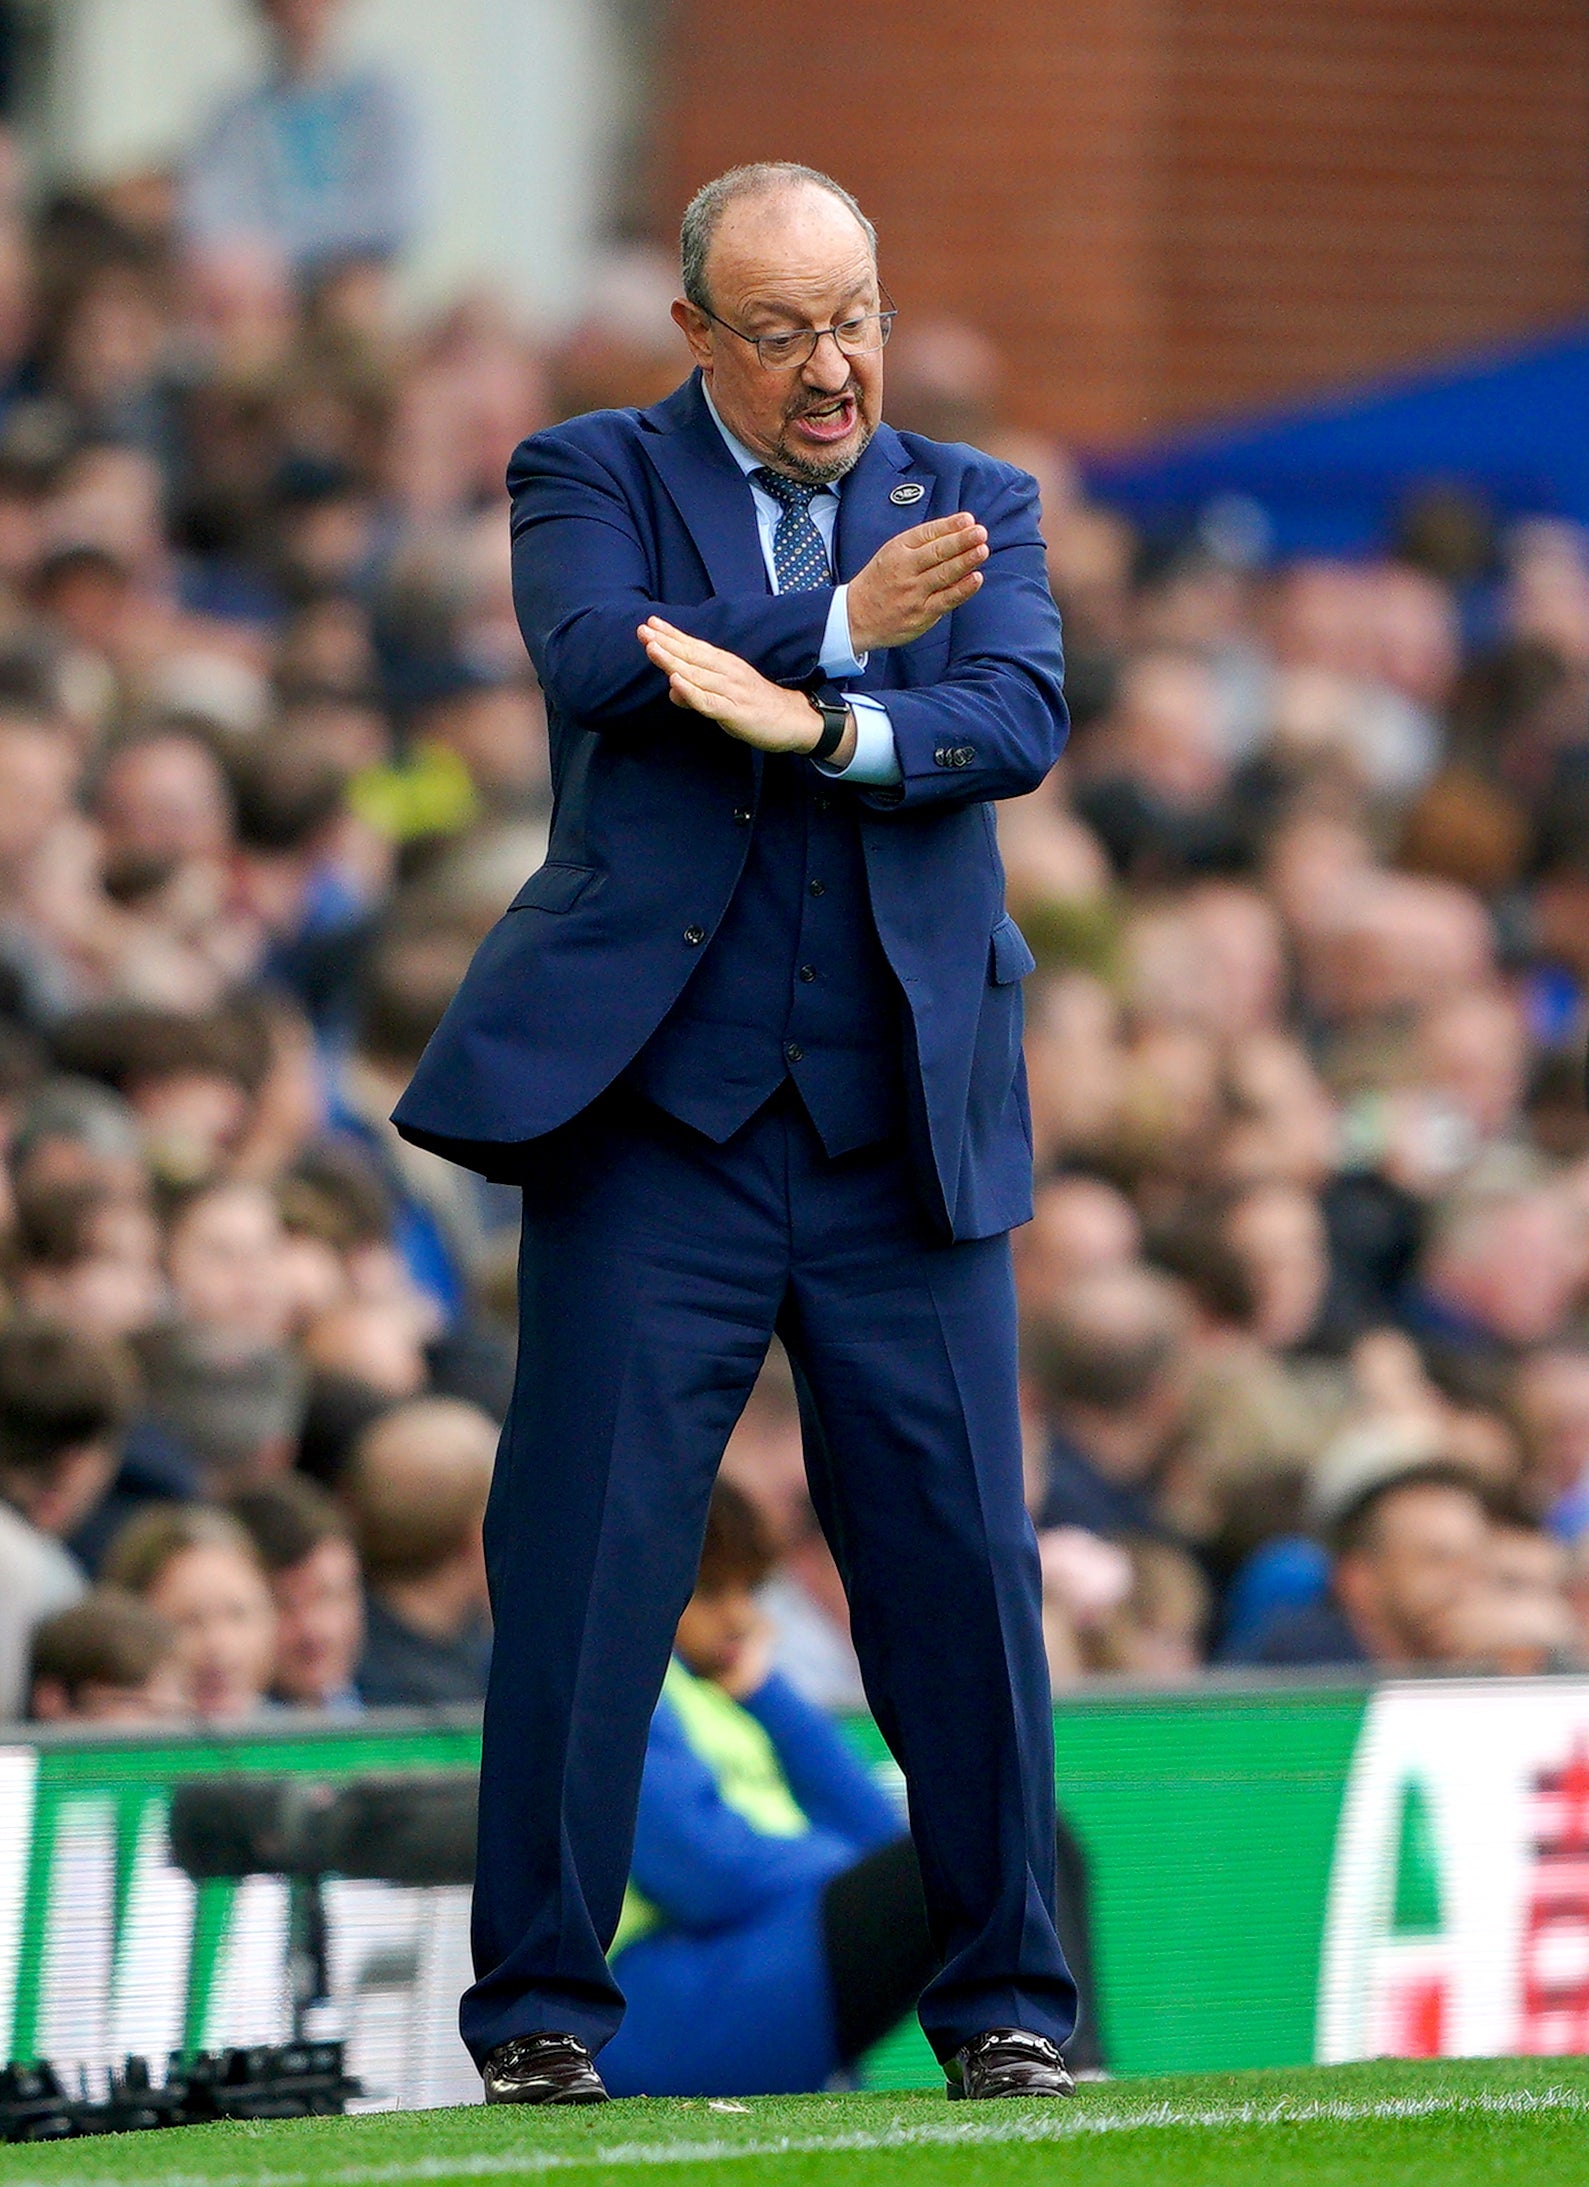 Everton manager Rafael Benitez insists he is not under additional pressure (Peter Byrne/PA)